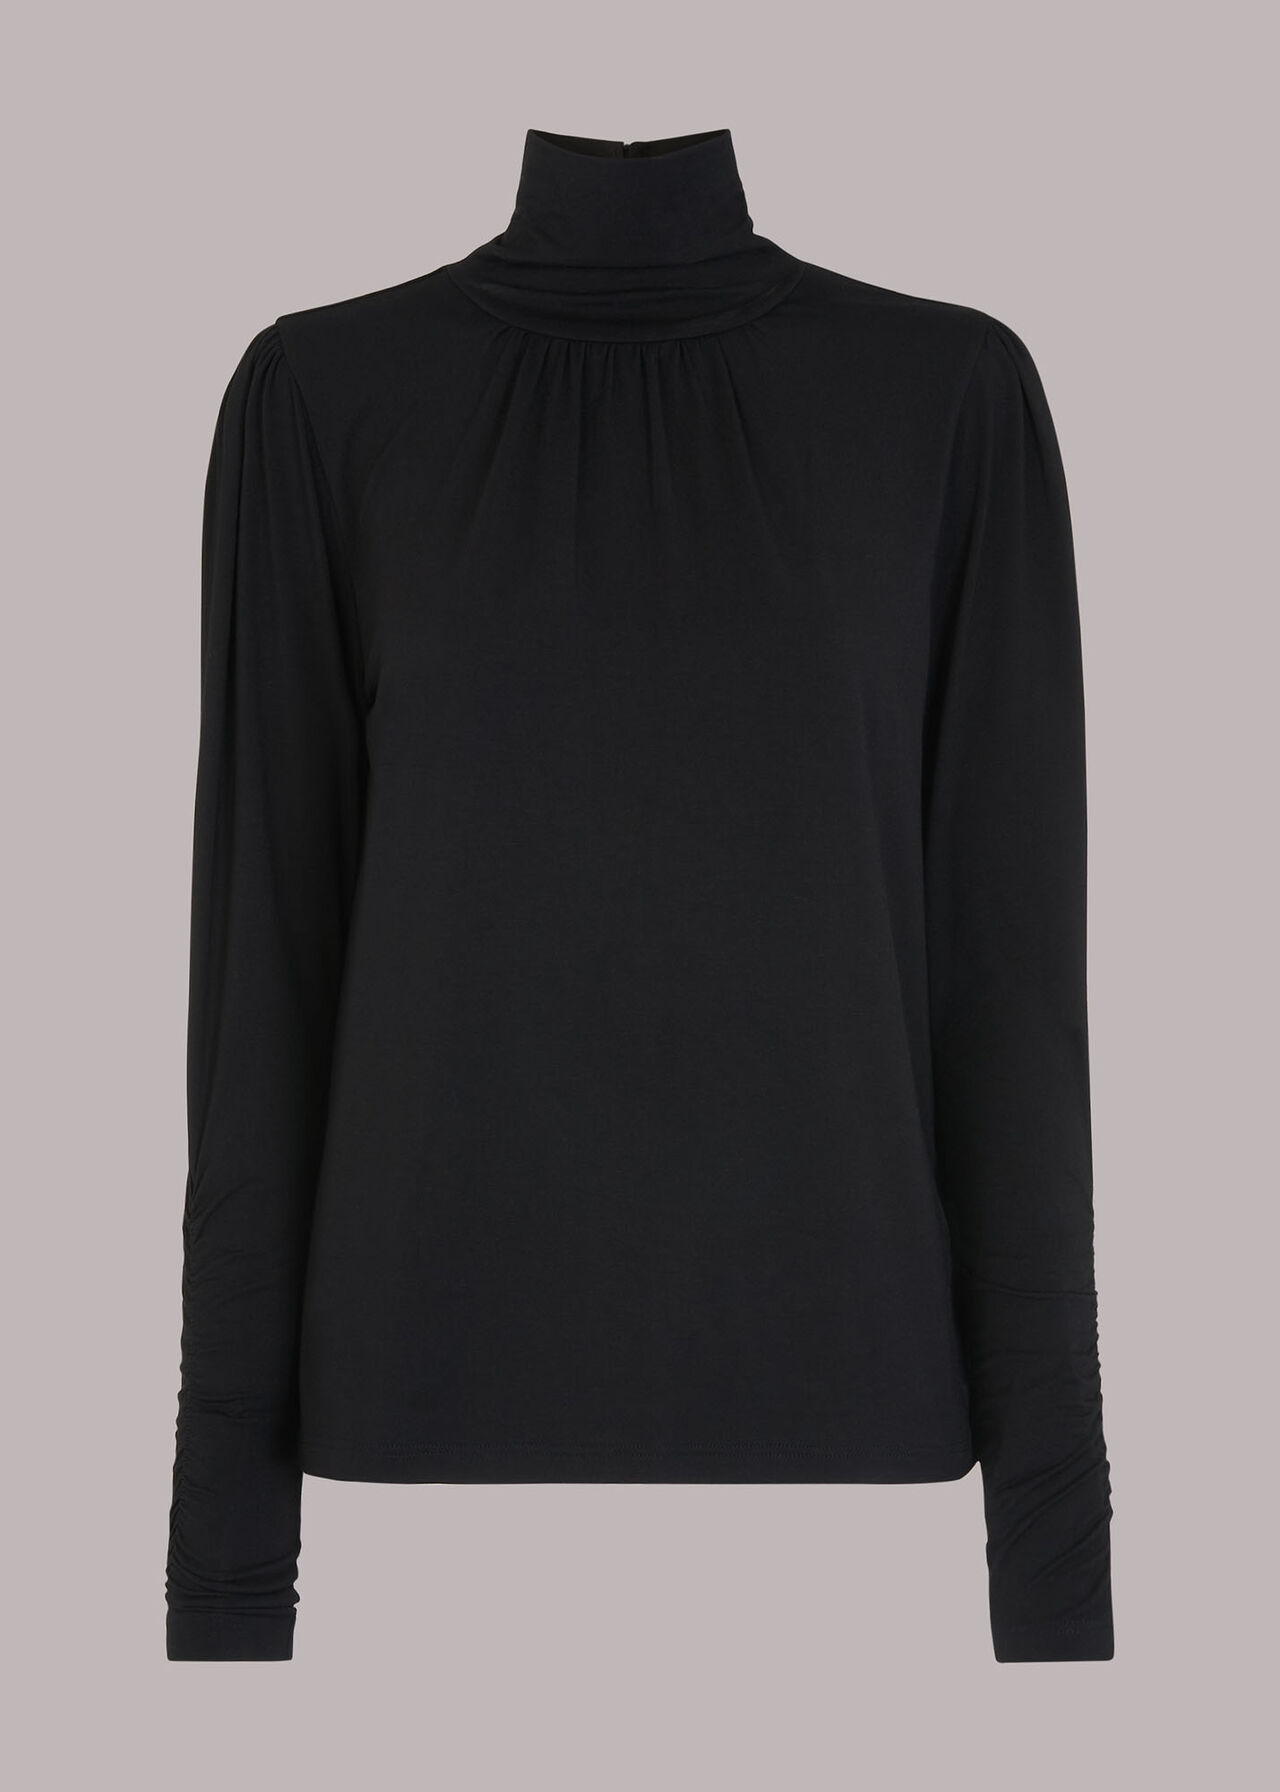 Black High Neck Ruched Sleeve Top | WHISTLES | Whistles UK